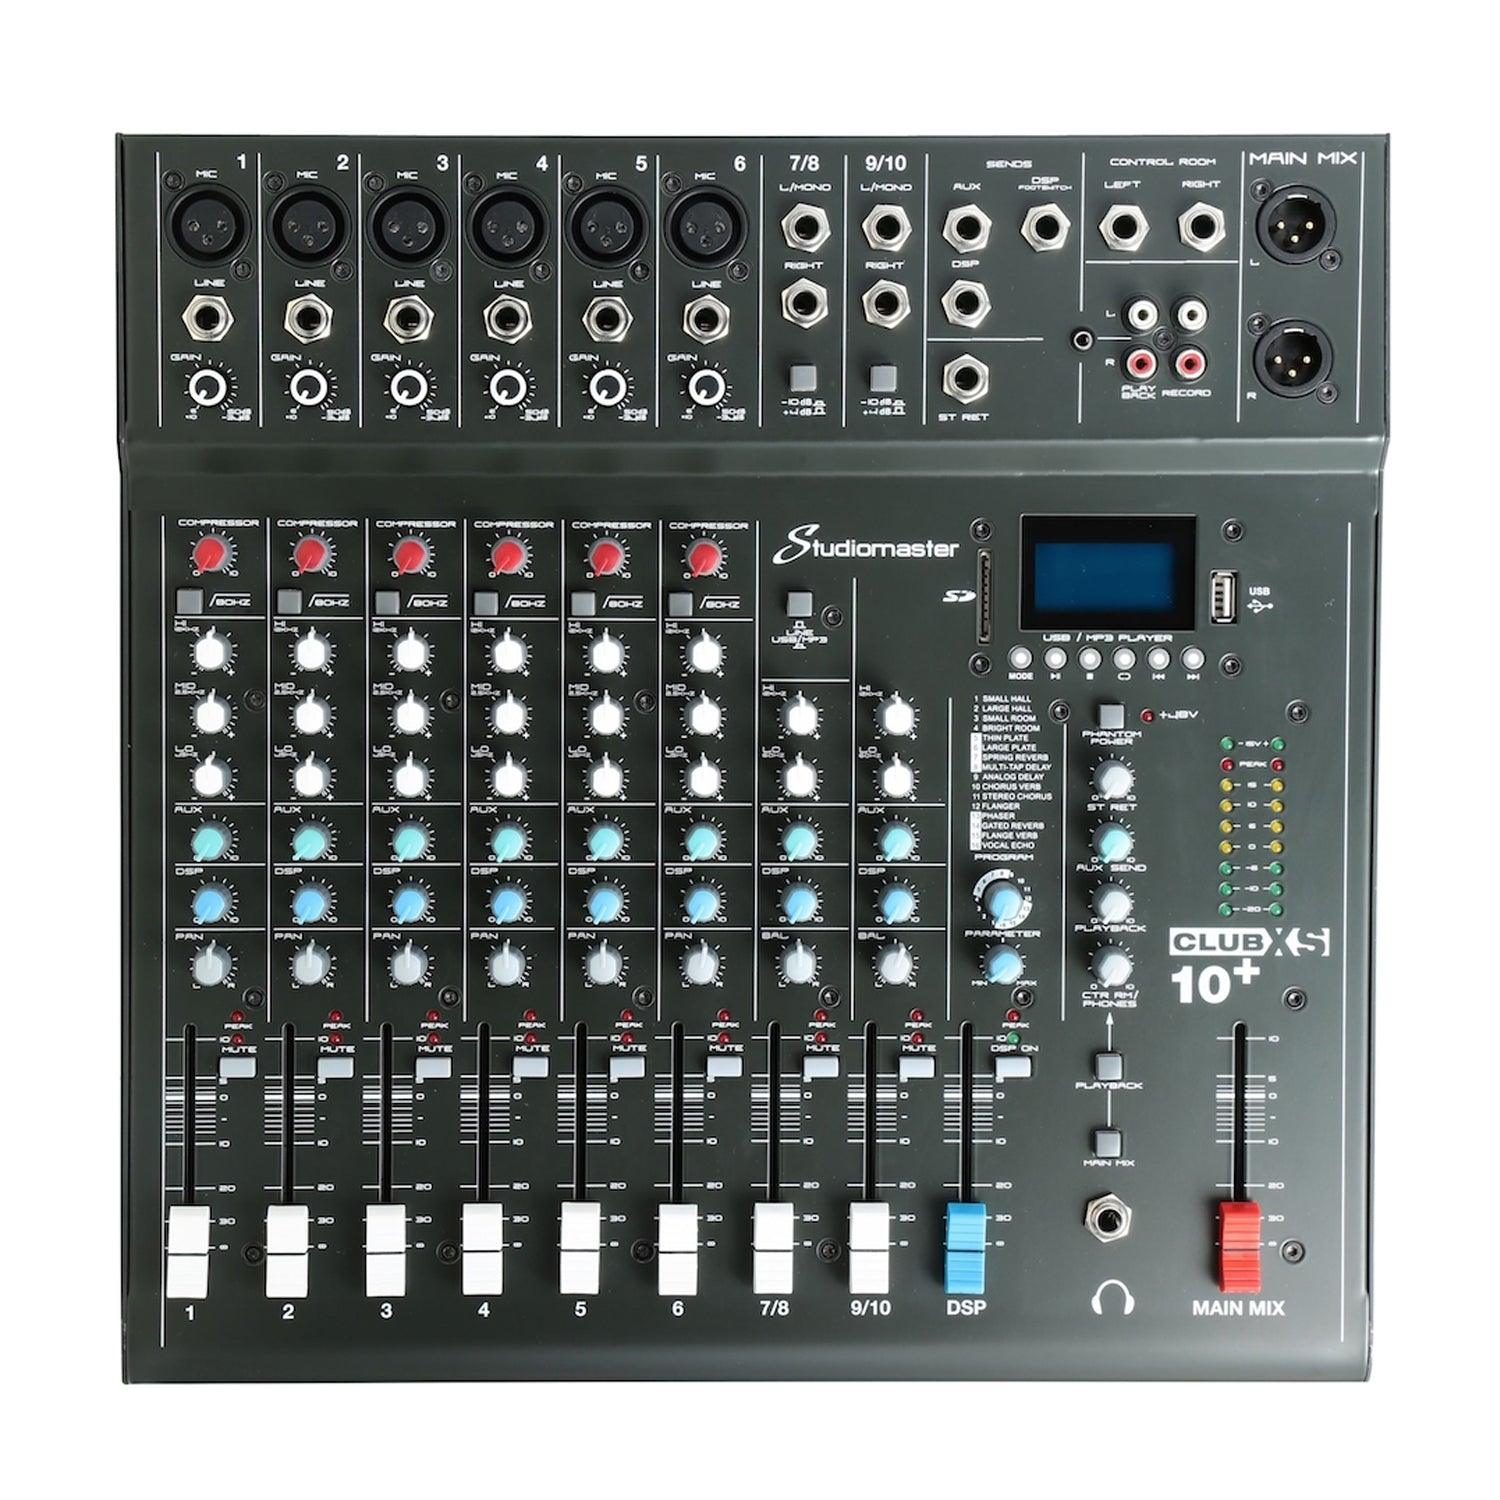 Studiomaster CLub XS 10+ 8 Channel Mixing Desk - DY Pro Audio